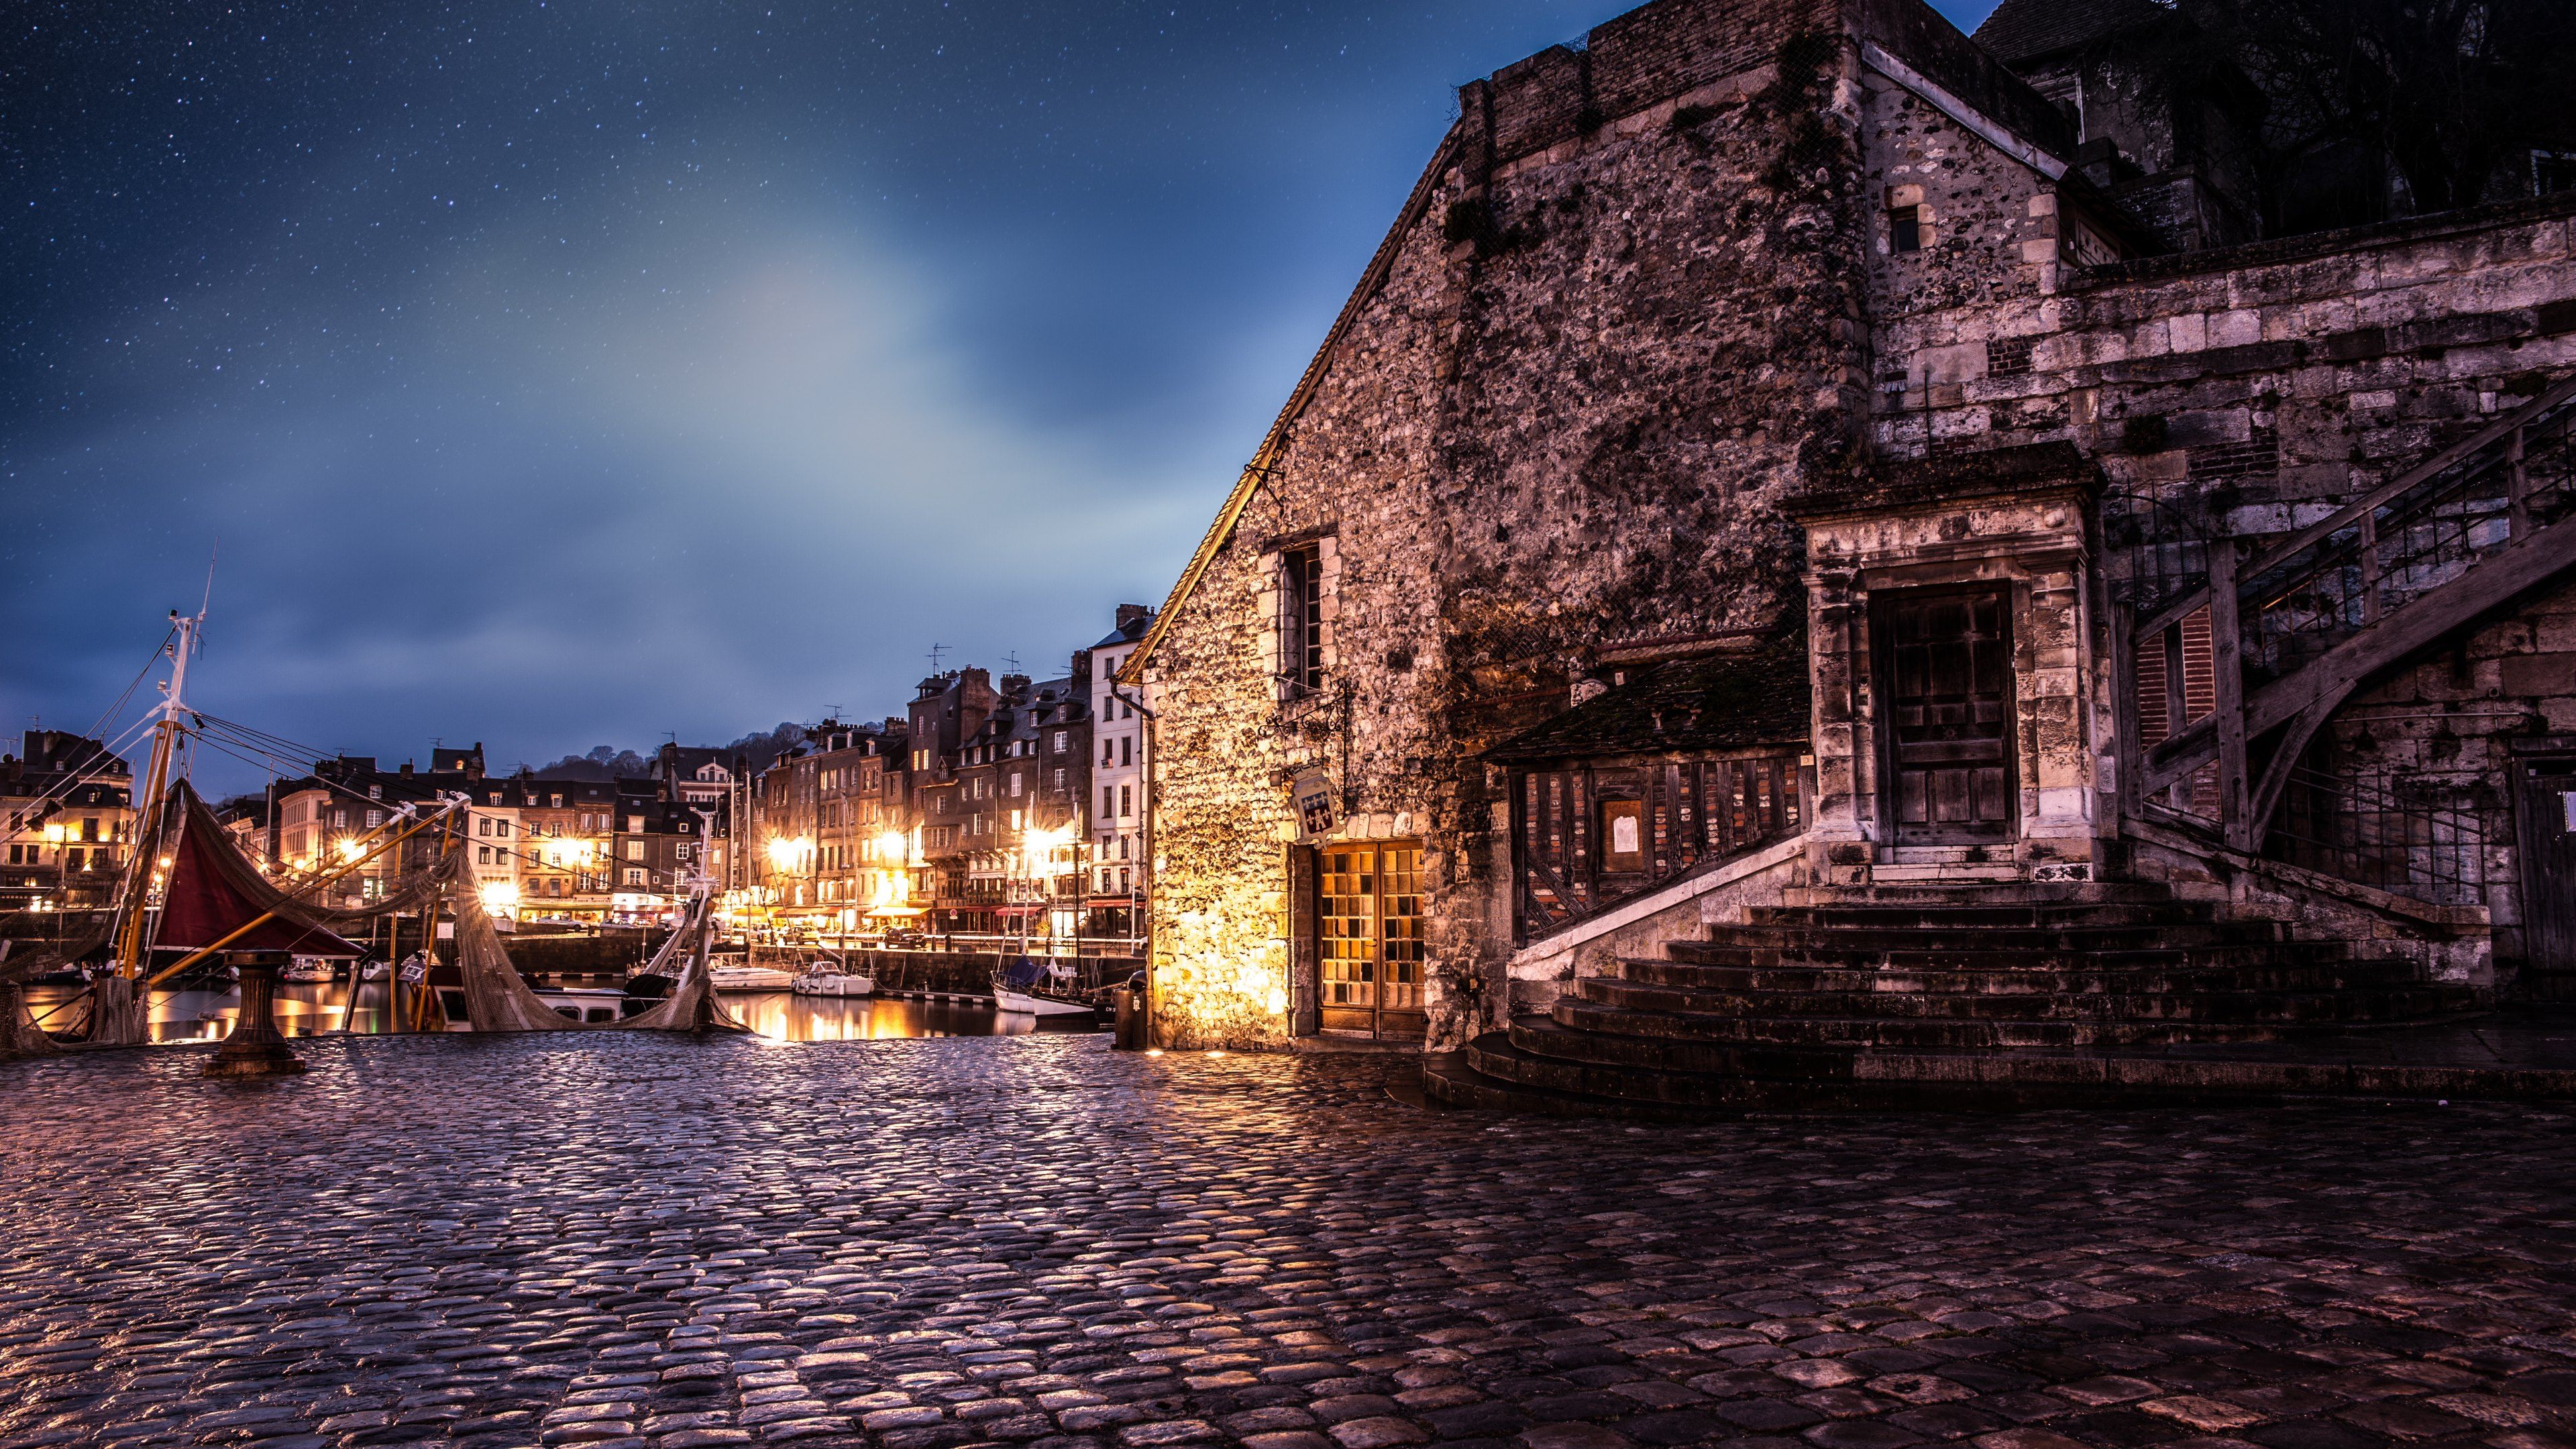 City Architecture Medieval Honfleur ultra HD wallpaper